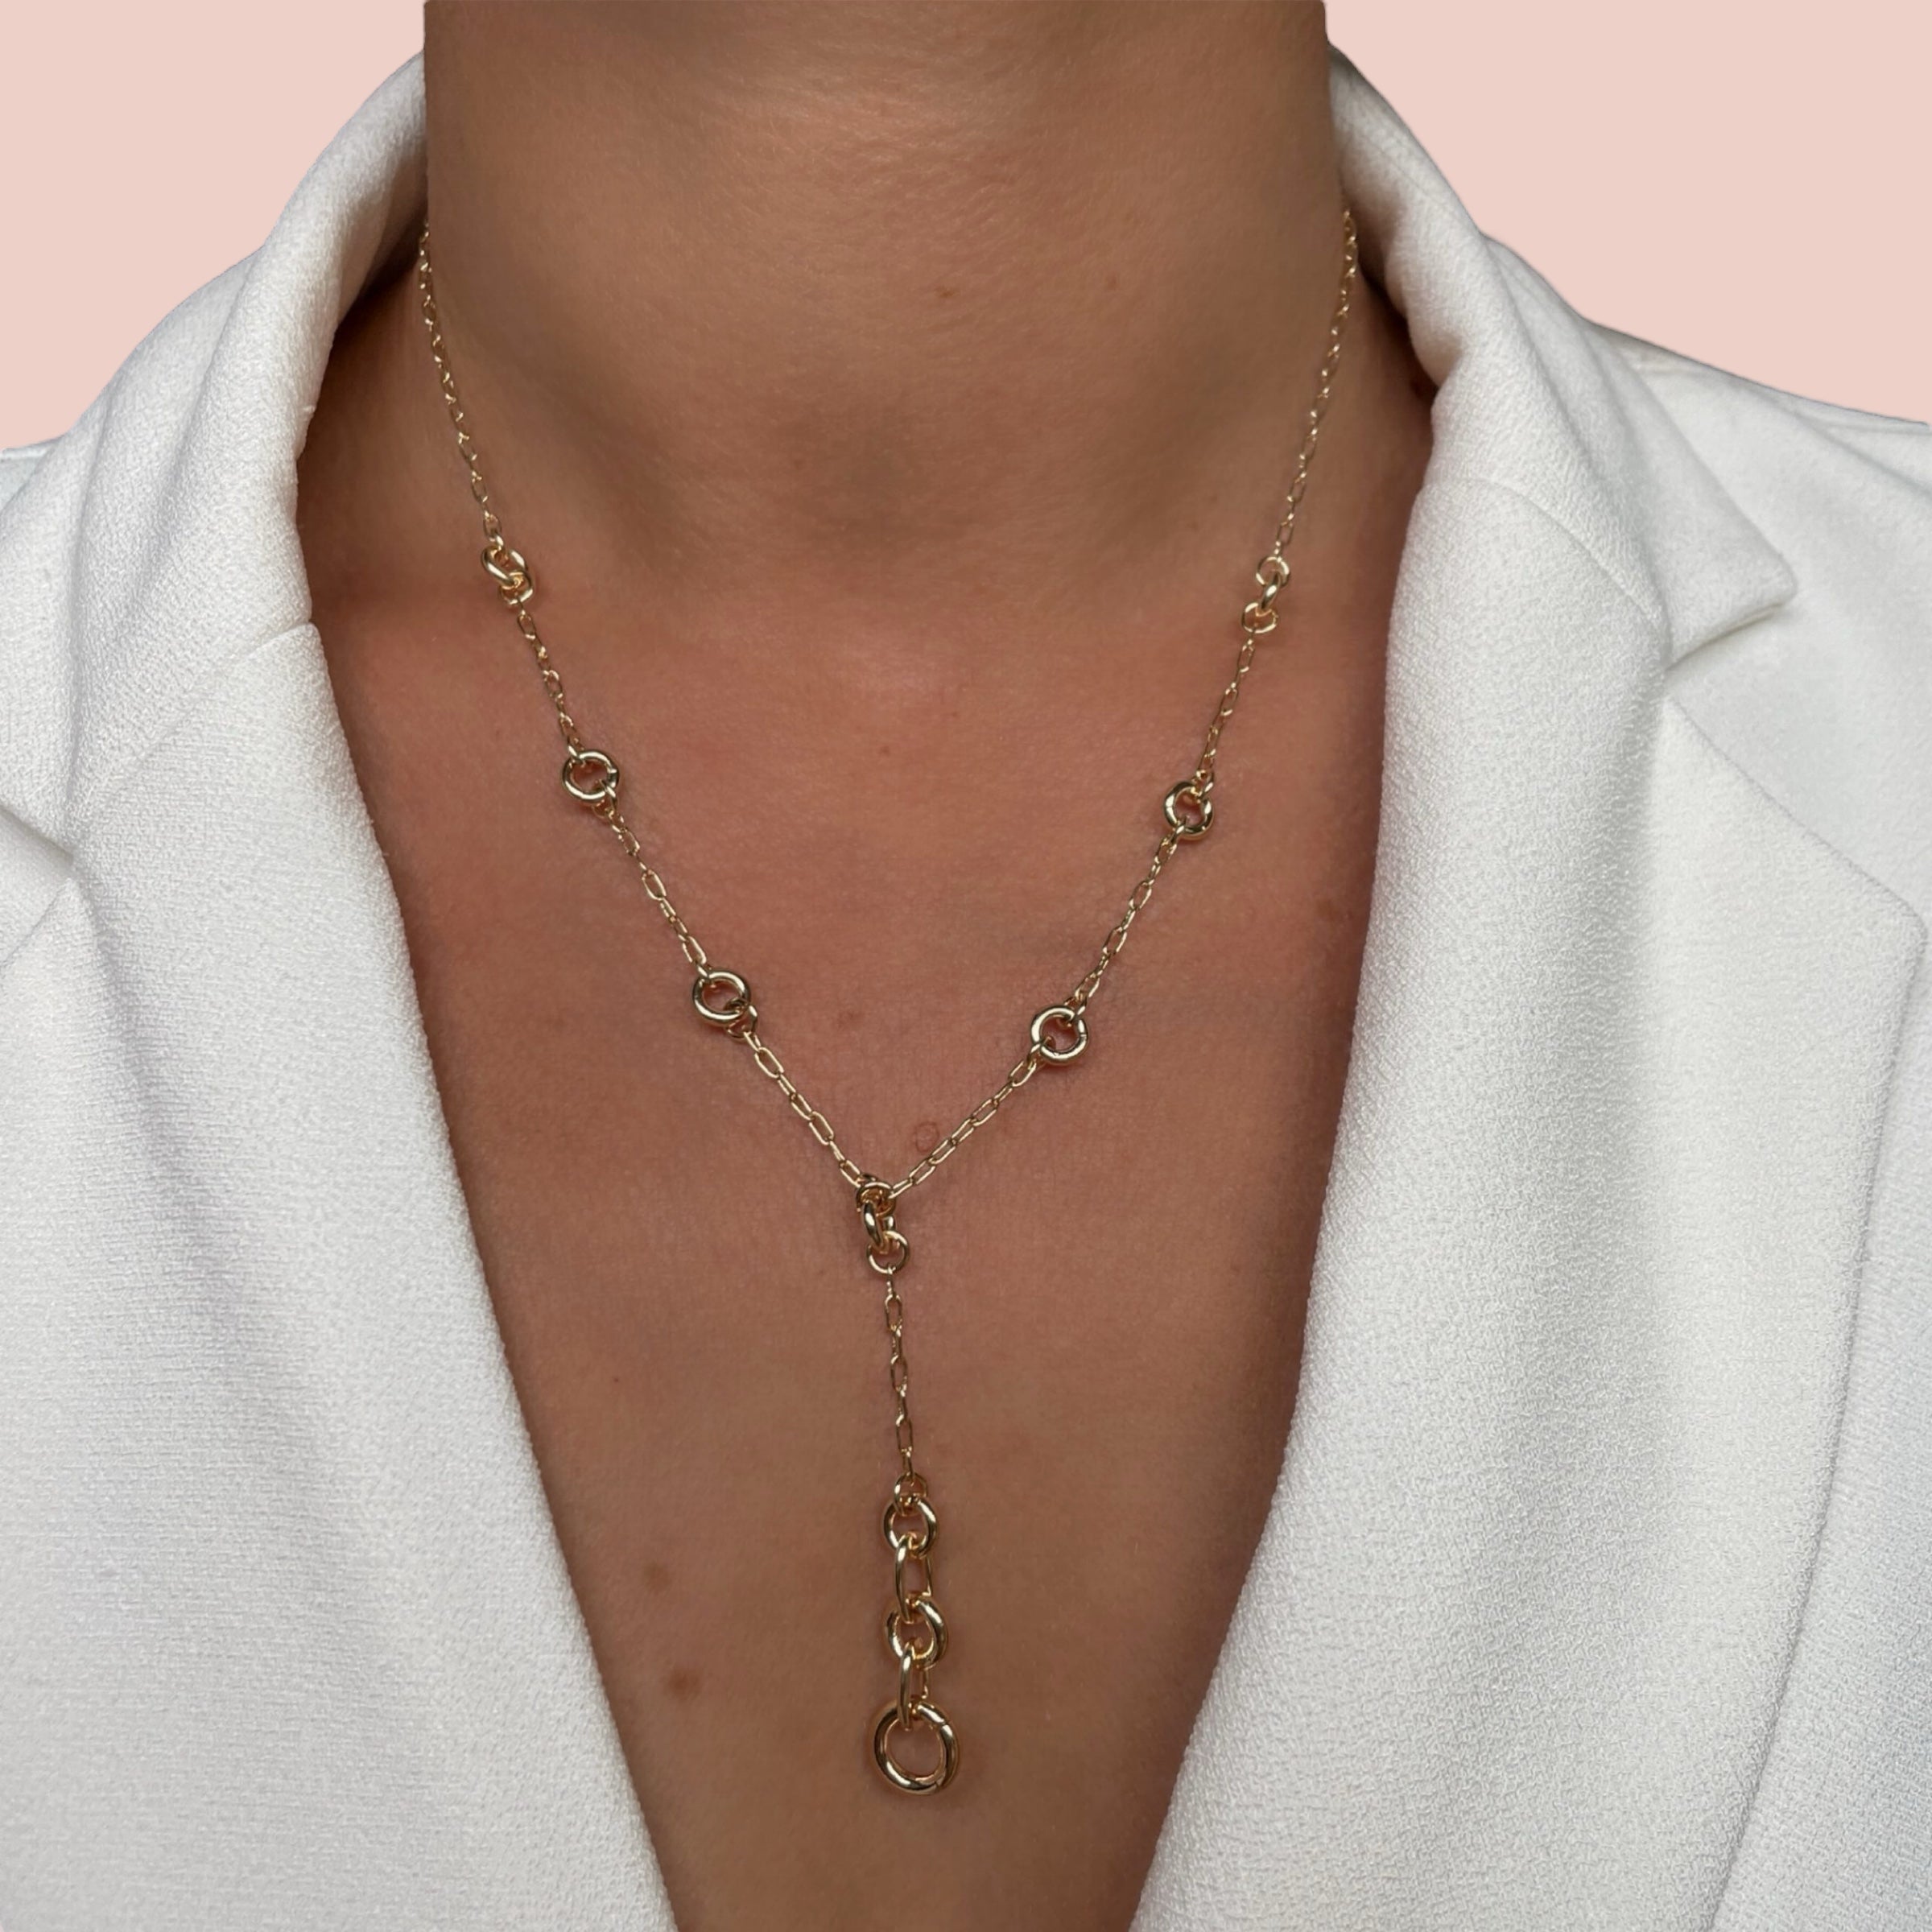 Gold-plated “Chain” necklace